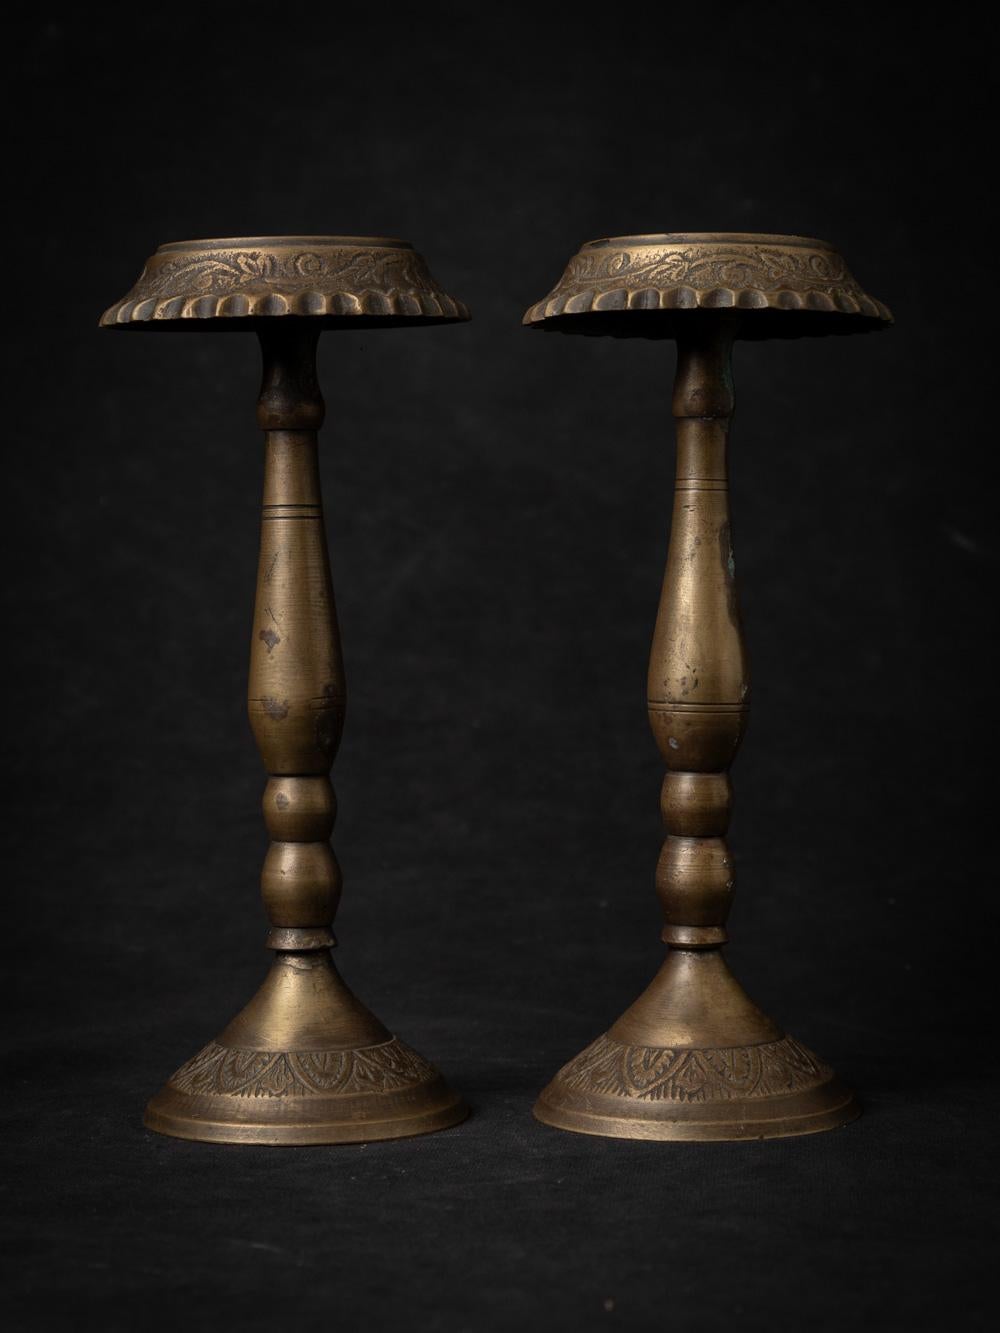 Certainly, here's a more detailed description:

This exquisite pair of antique Candle Holders from 19th-century India showcases the enduring beauty of traditional craftsmanship. Handcrafted from bronze, a material renowned for its durability and